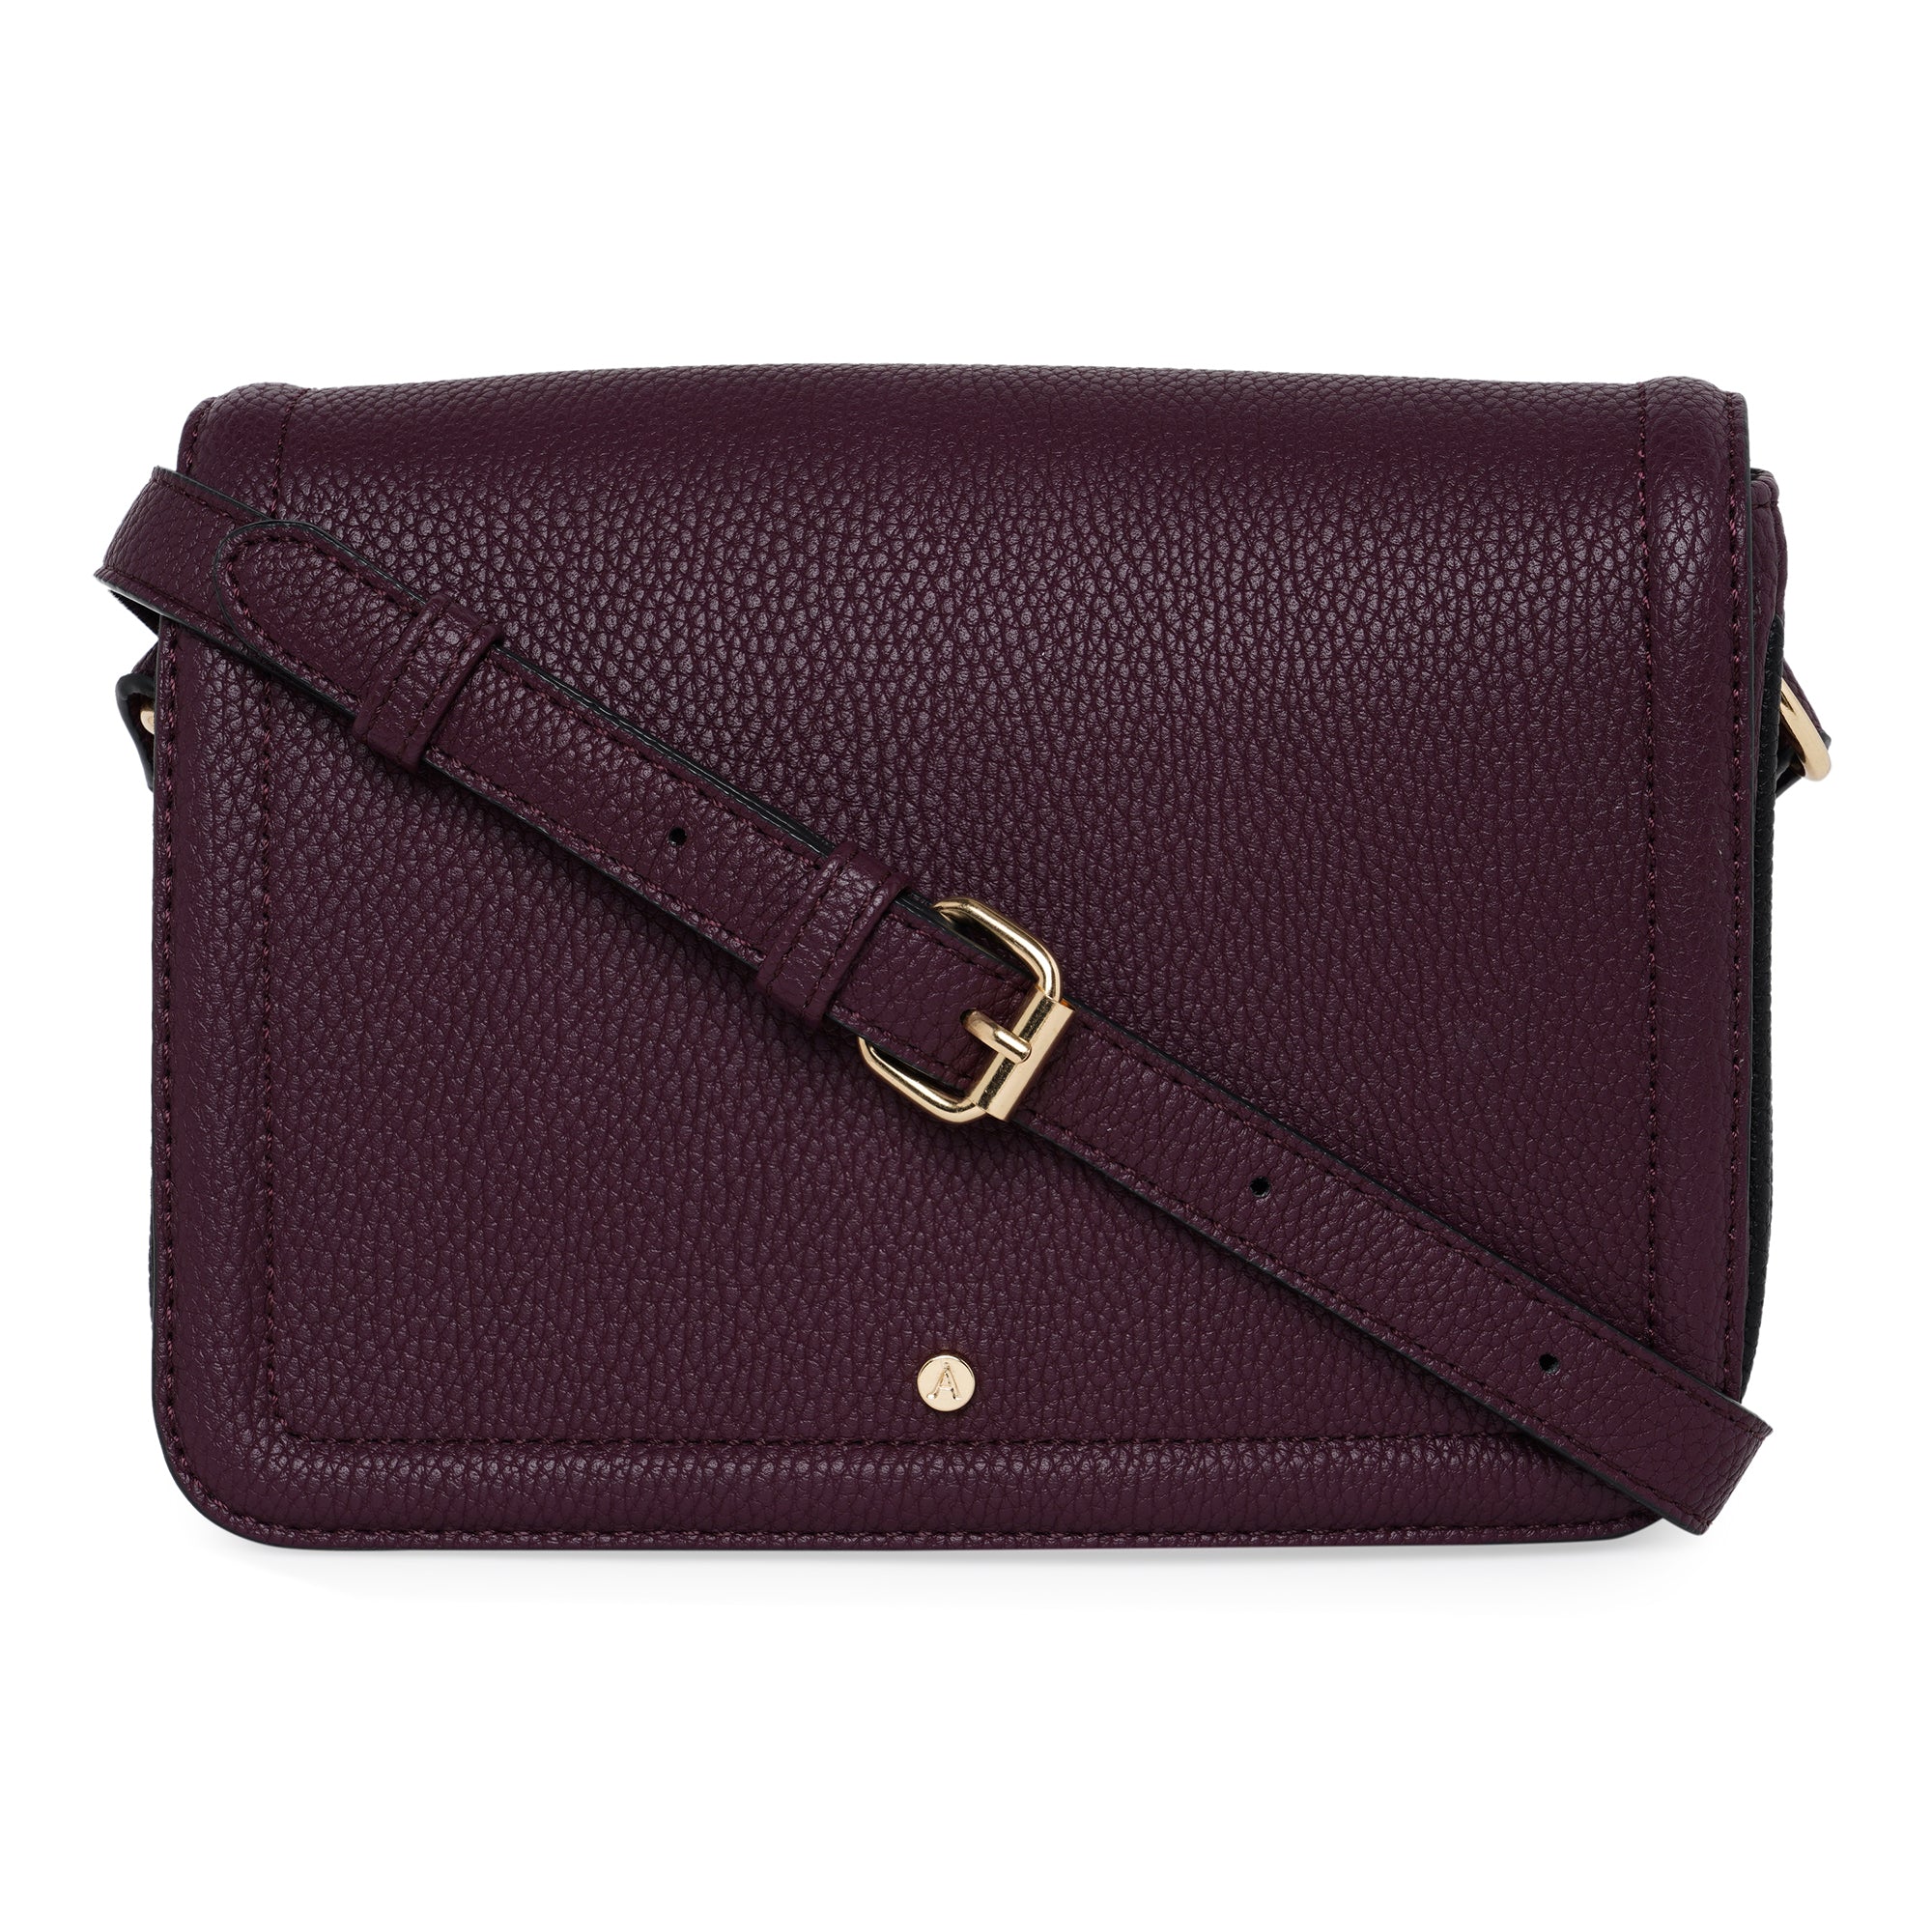 Accessorize London Women'S Faux Leather Maroon Tara Compartment Sling ...